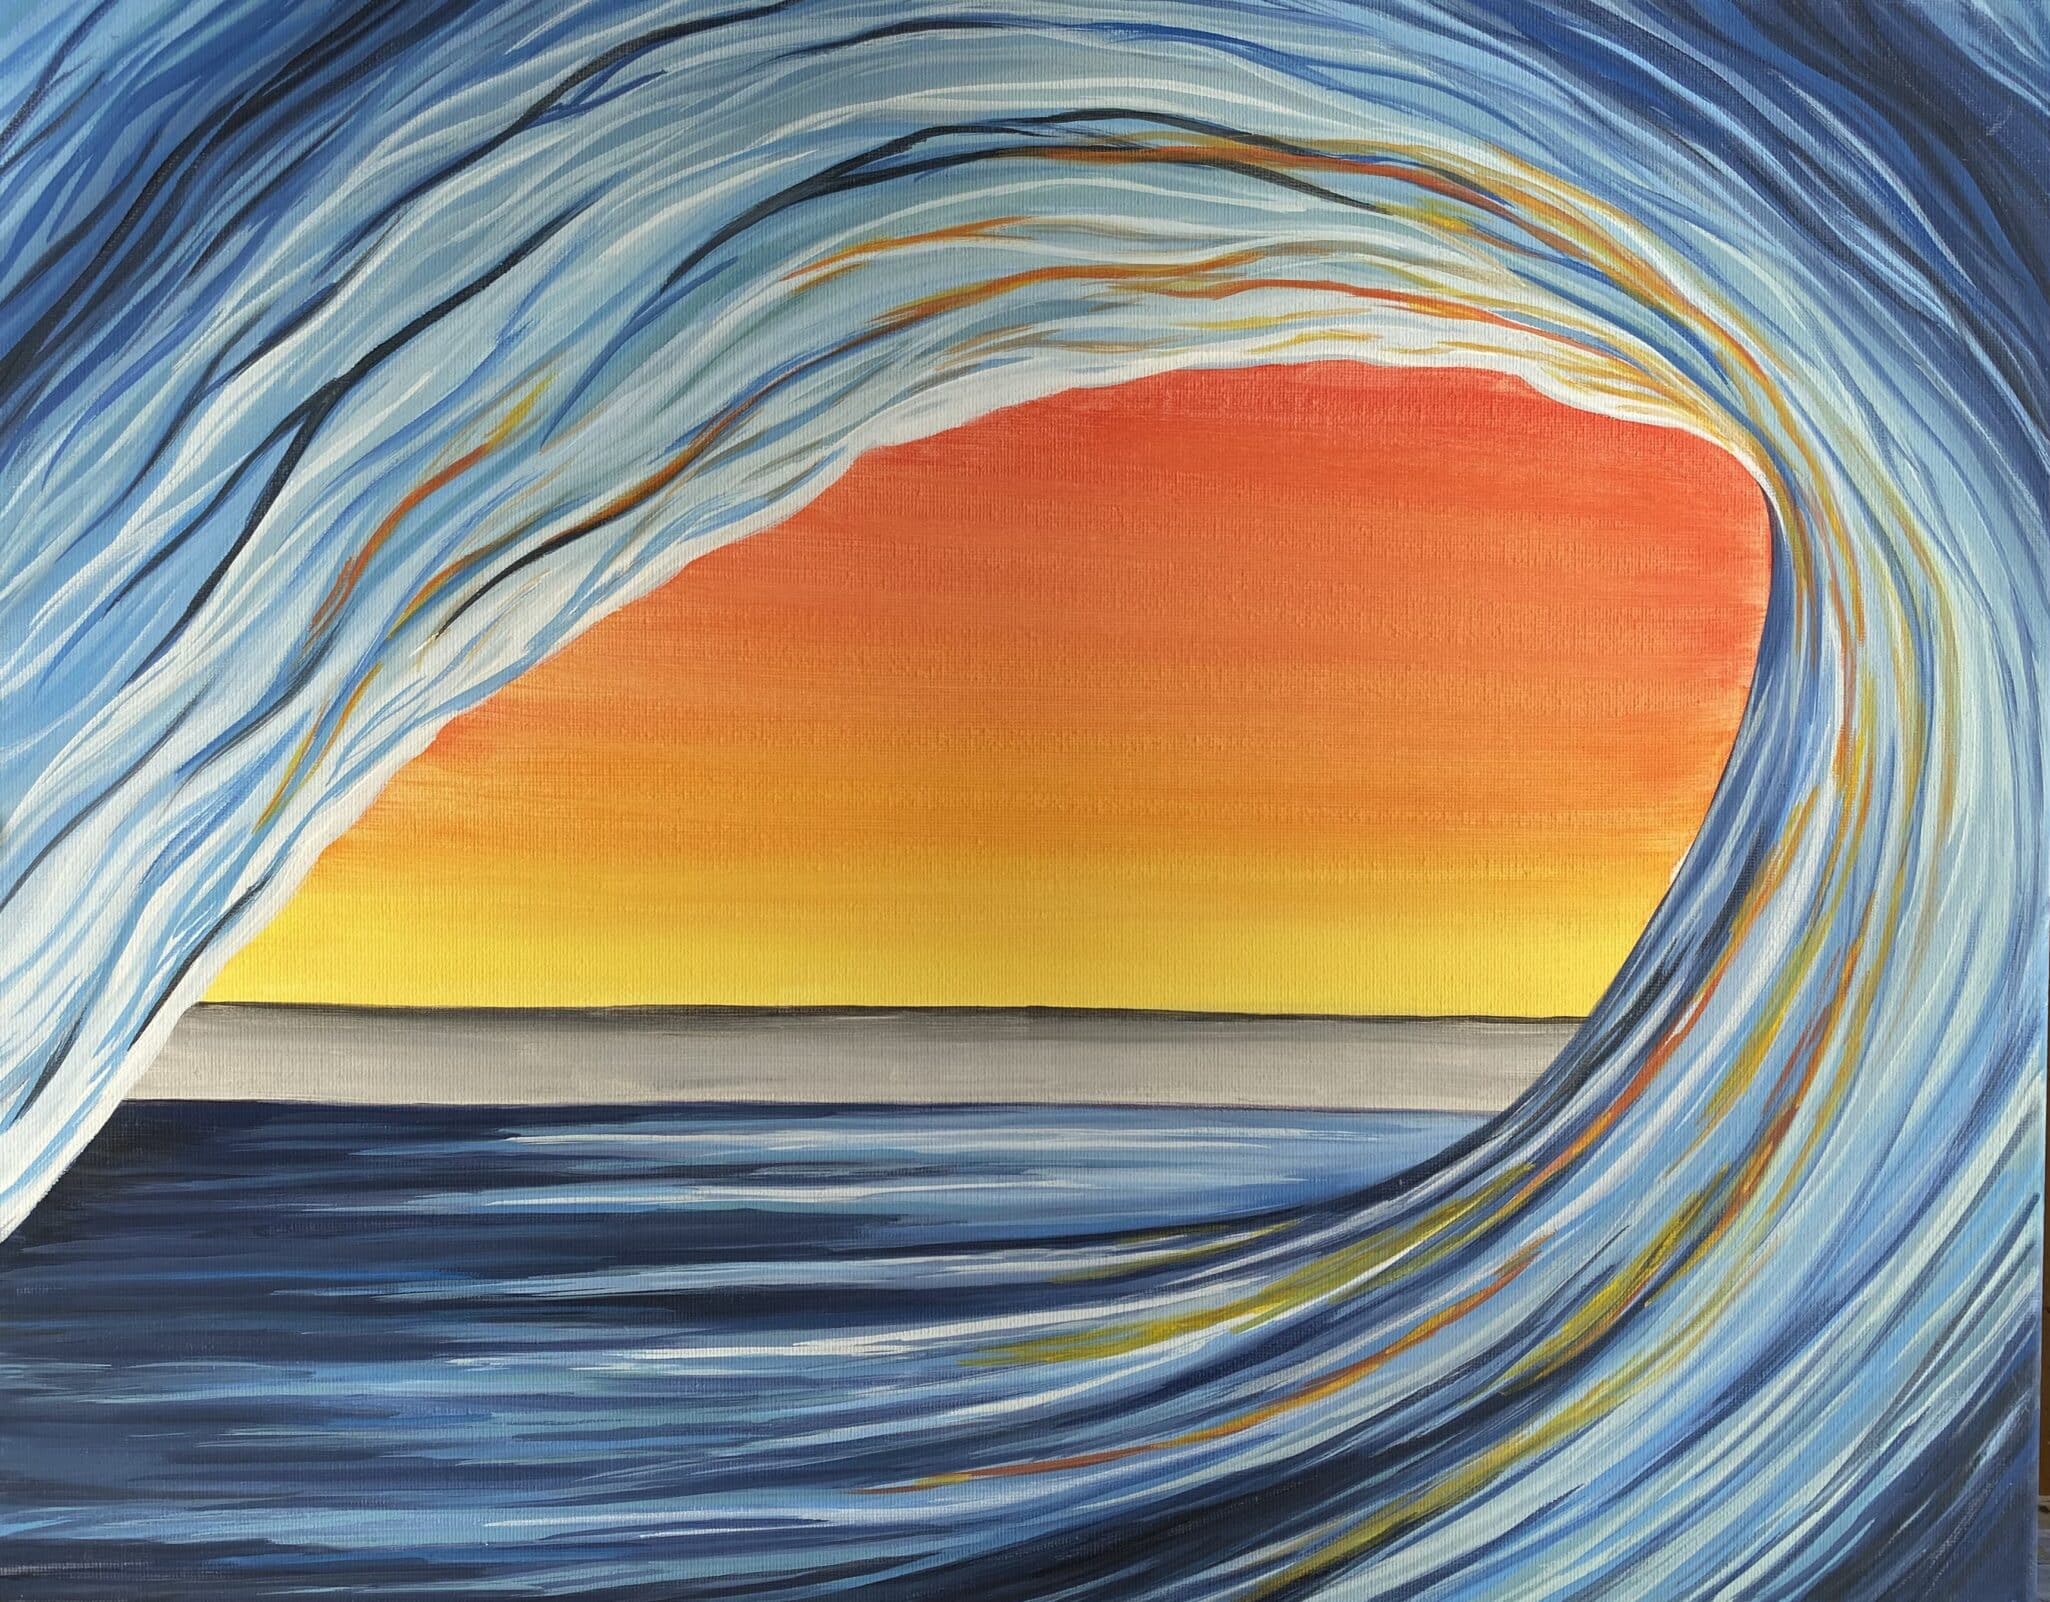 SUNSET WAVE PAINTING